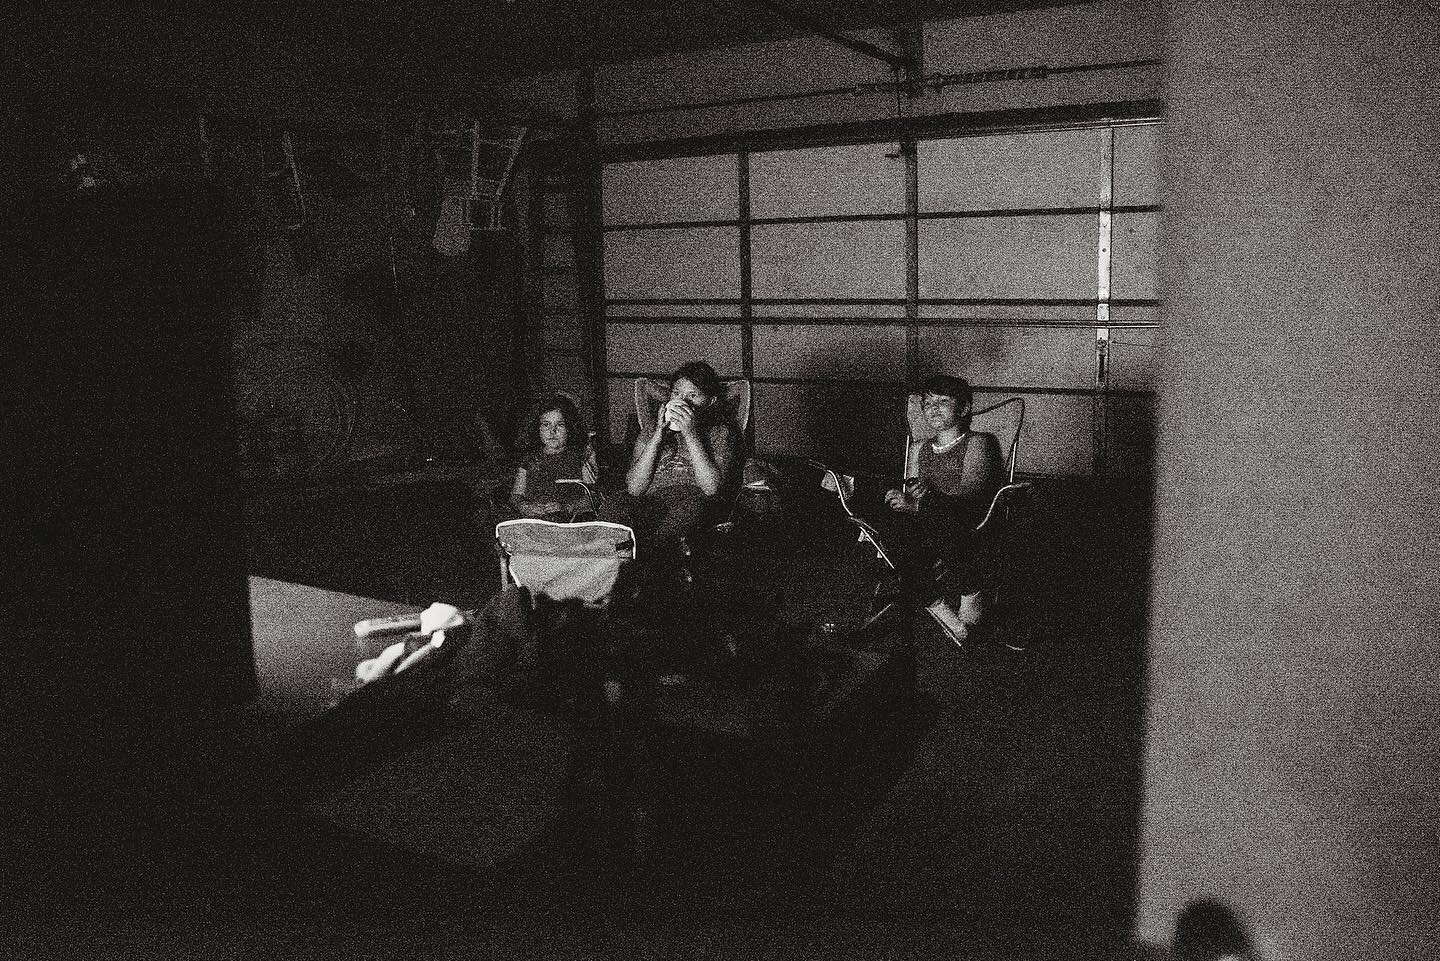 A random summer night in the life of three kids. 
.
Garage movie✔️
Sibling time✔️
Snacks✔️
.
Sitting in a garage in the suburbs living your best life with your best pals and forever friends. 
.
Childhood adventures meant to be remembered - running th